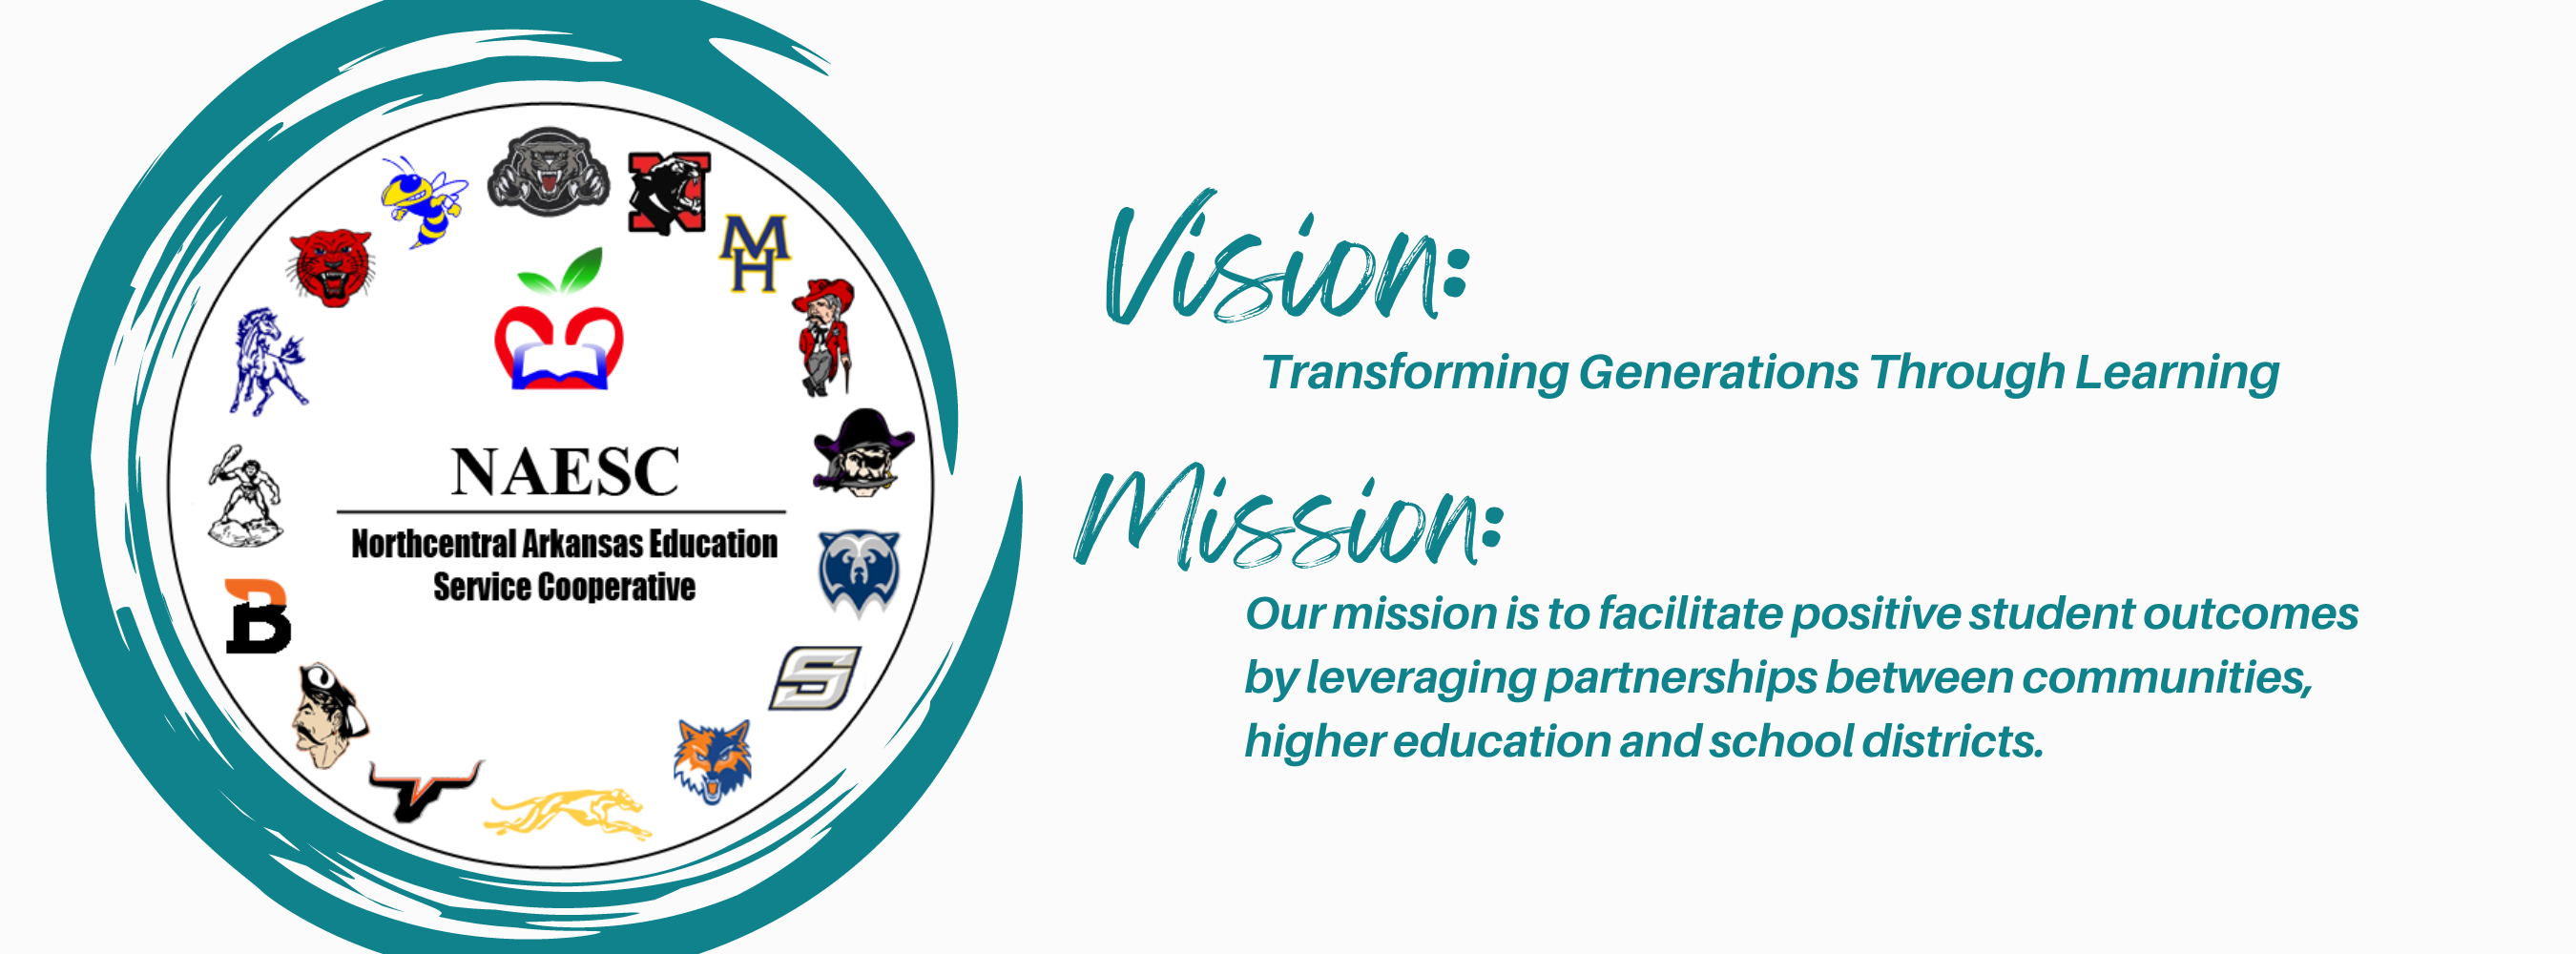 NAESC logo with a blue/teal circular paint stroke behind it. Text in the same color reads: Vision: Transforming generations through learning Mission: Our mission is to facilitate positive student outcomes by leveraging partnerships between communities, higher education and school districts.